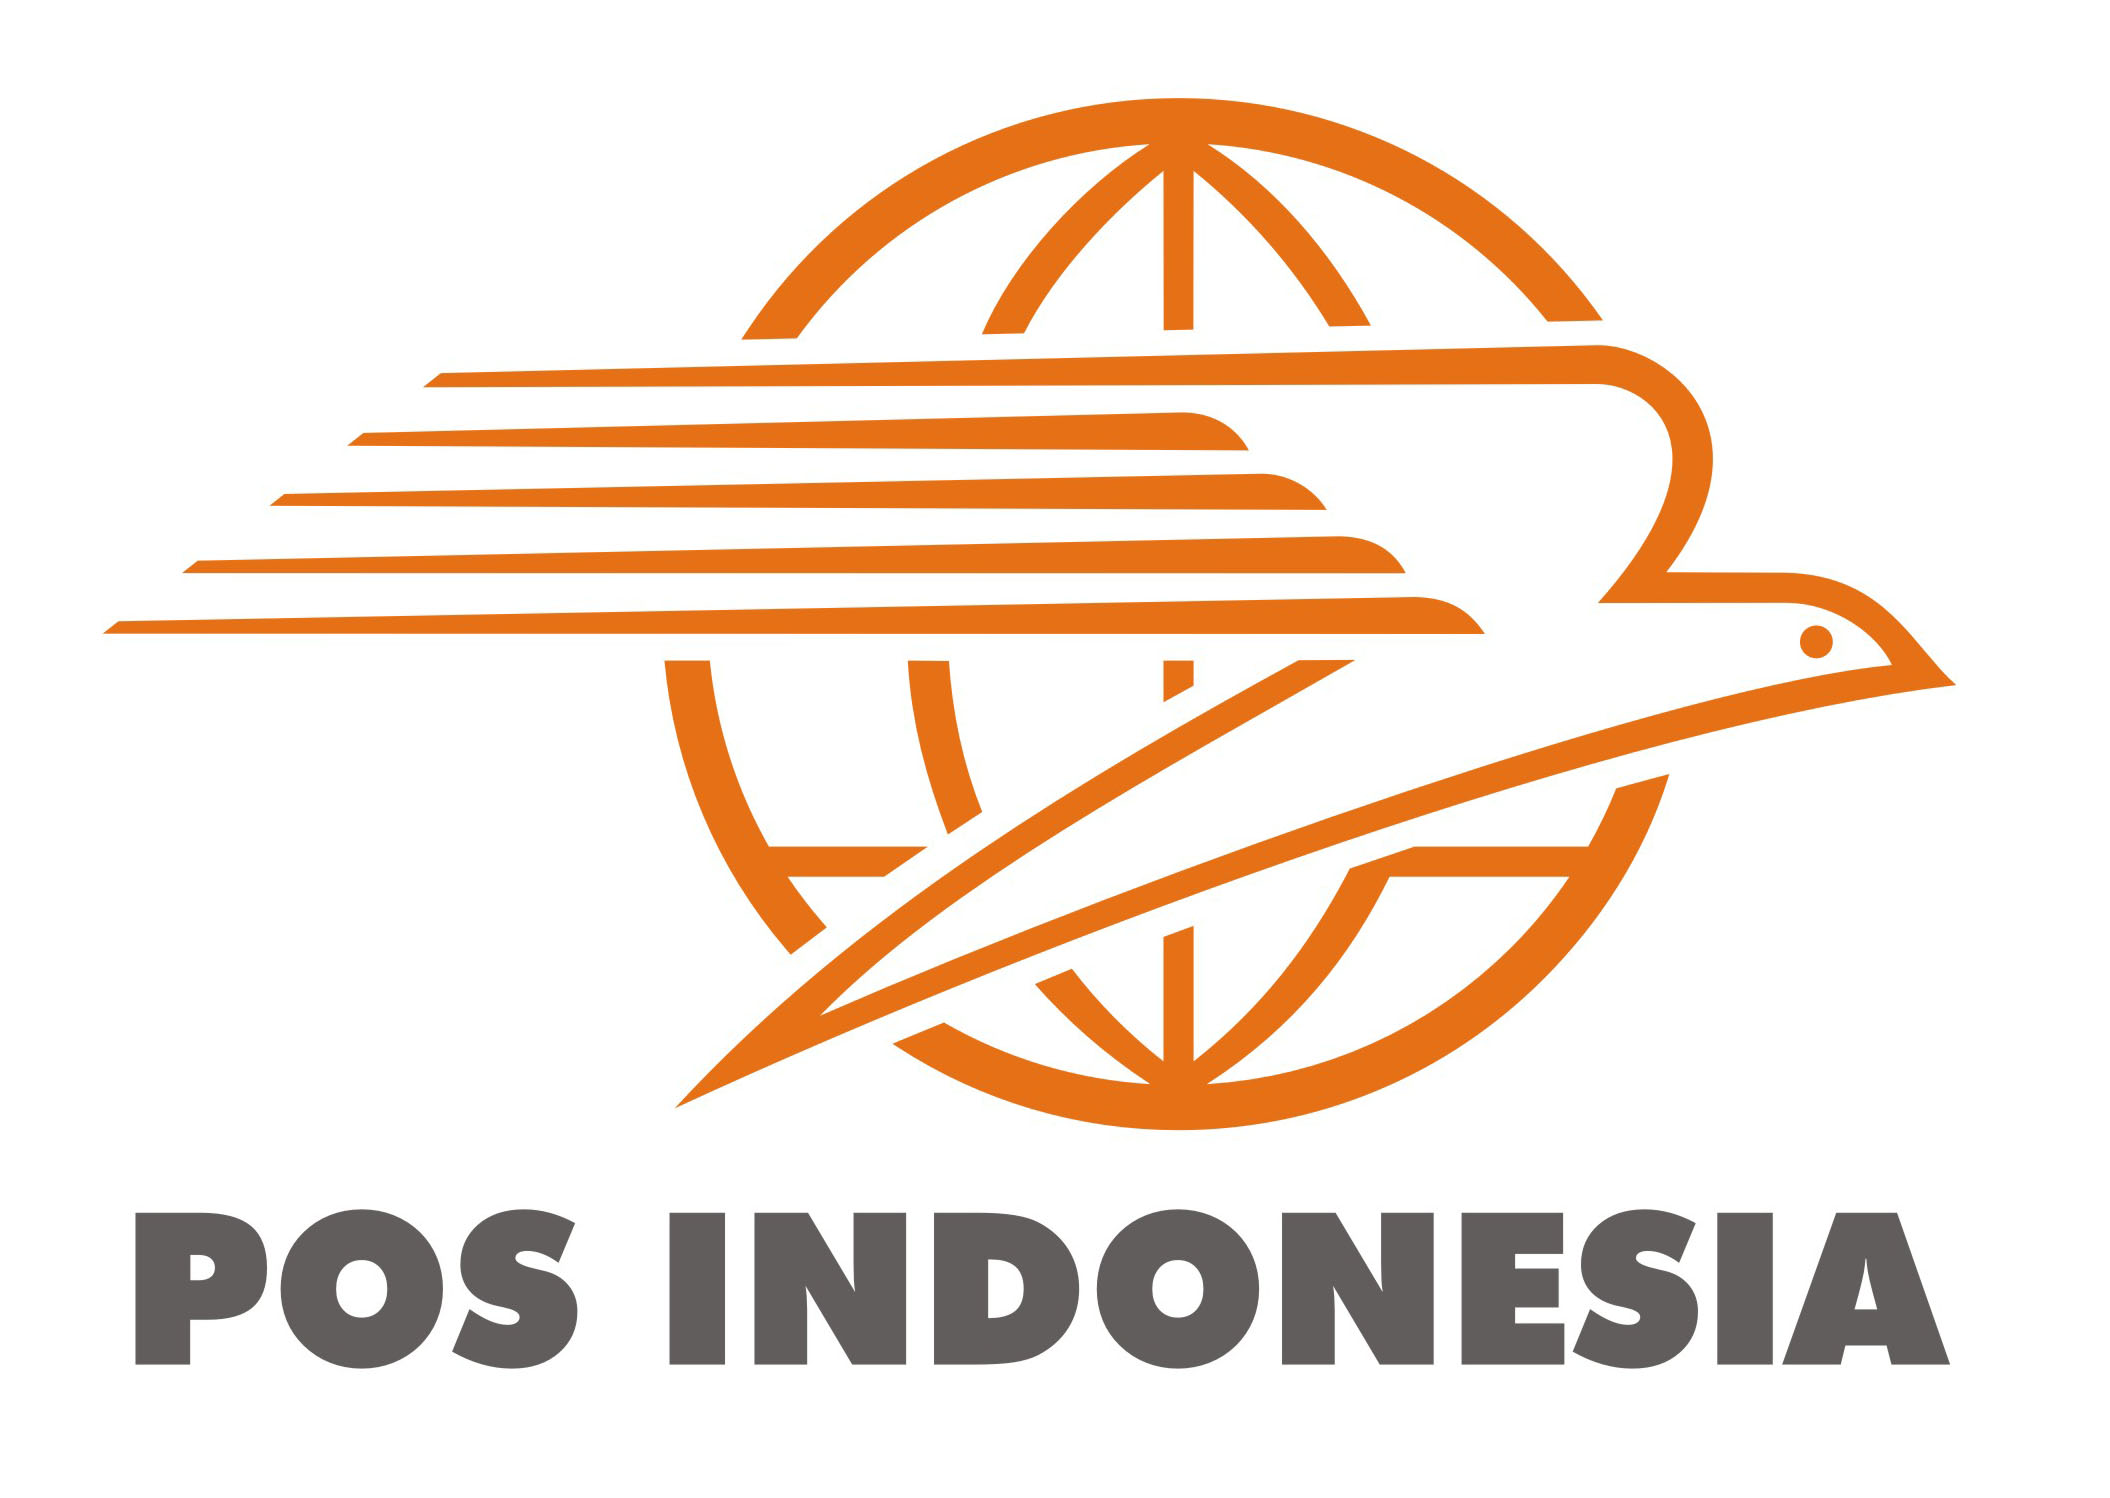 Pos Indonesia to introduce fintech services consist of payment, remittance, and "peer-to-peer lending" scheme payment